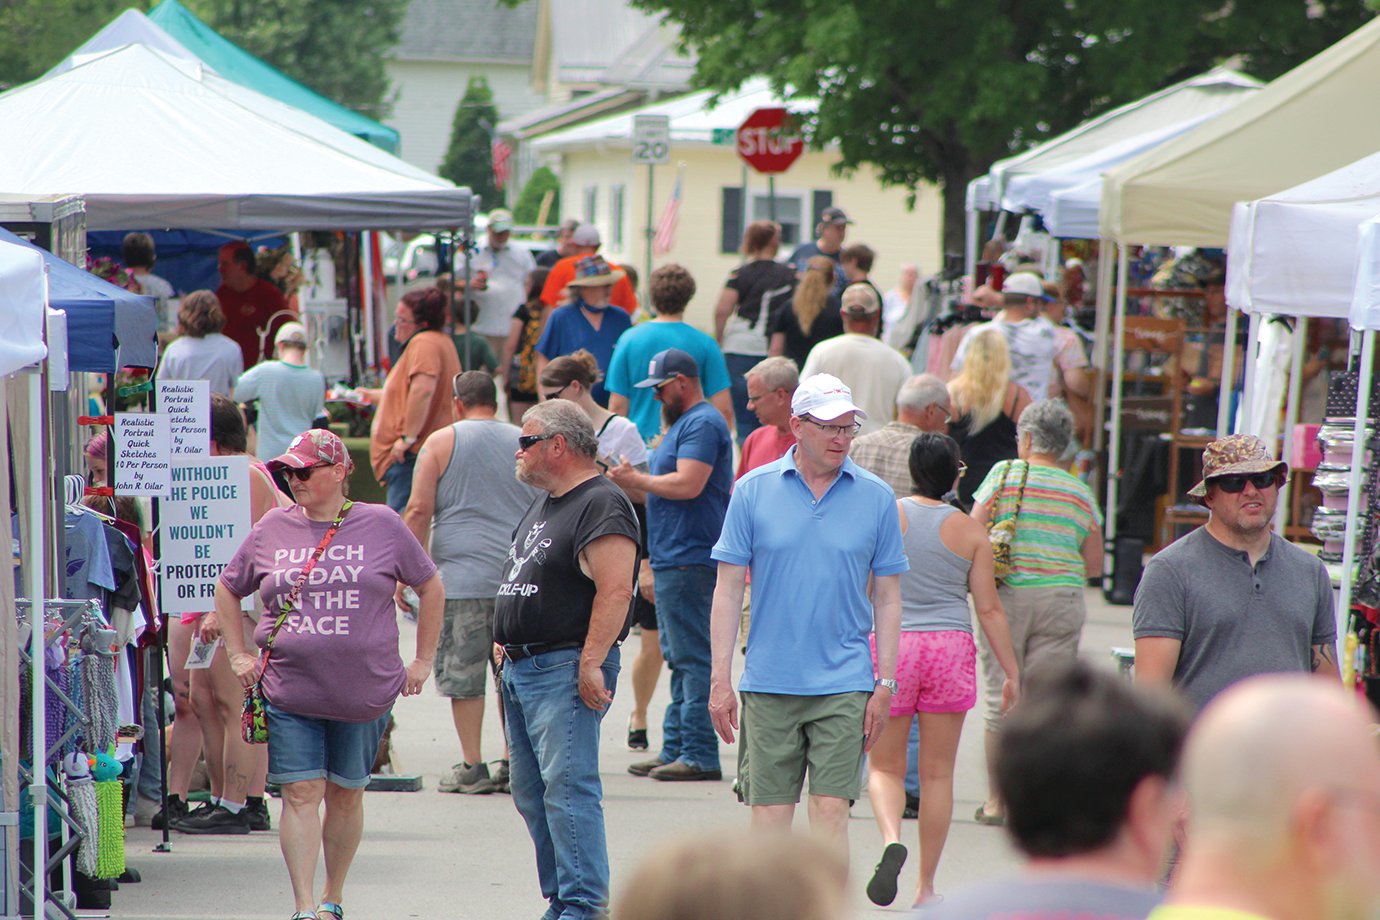 Hundreds turned out to the 2022 Waynetown Street Festival Saturday on South Vine Street, where more than 70 vendors from Montgomery and the surrounding counties sold their homemade goods. Hot dogs, prizes, ice cream and snow cones were available for children, and adults left with unique deals. Waynetown is set to host four more festivals this year. For more information, check out www.waynetown.net.